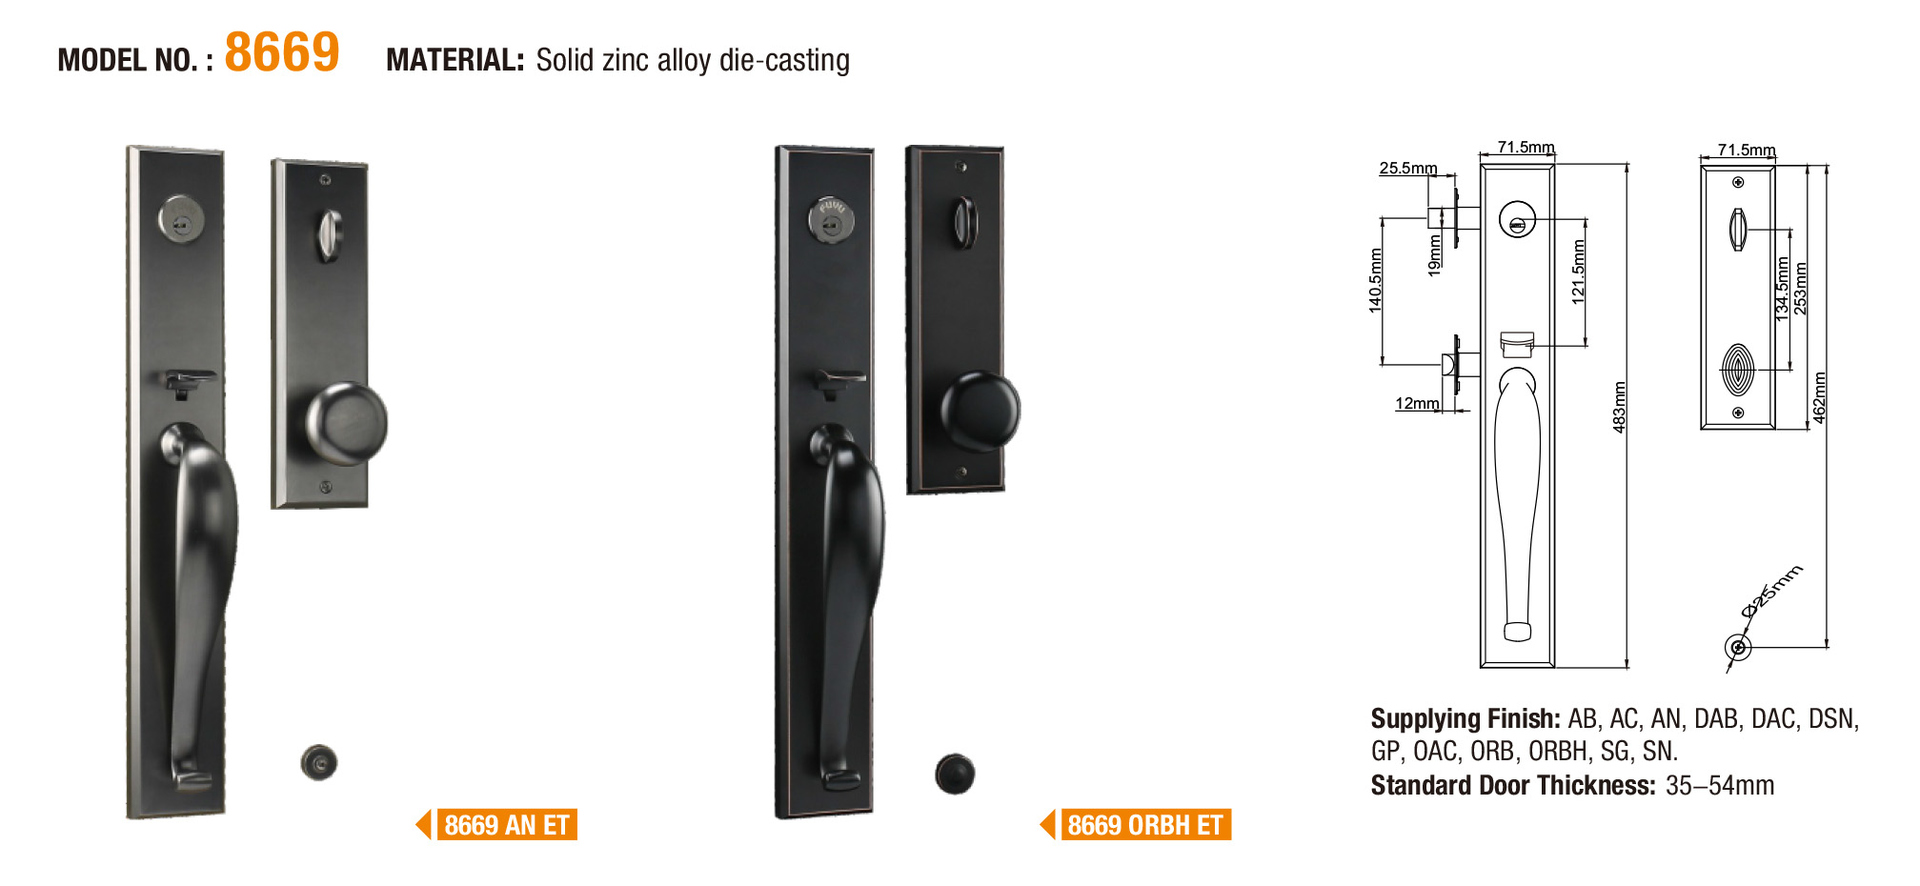 FUYU high security door locks for sale for home